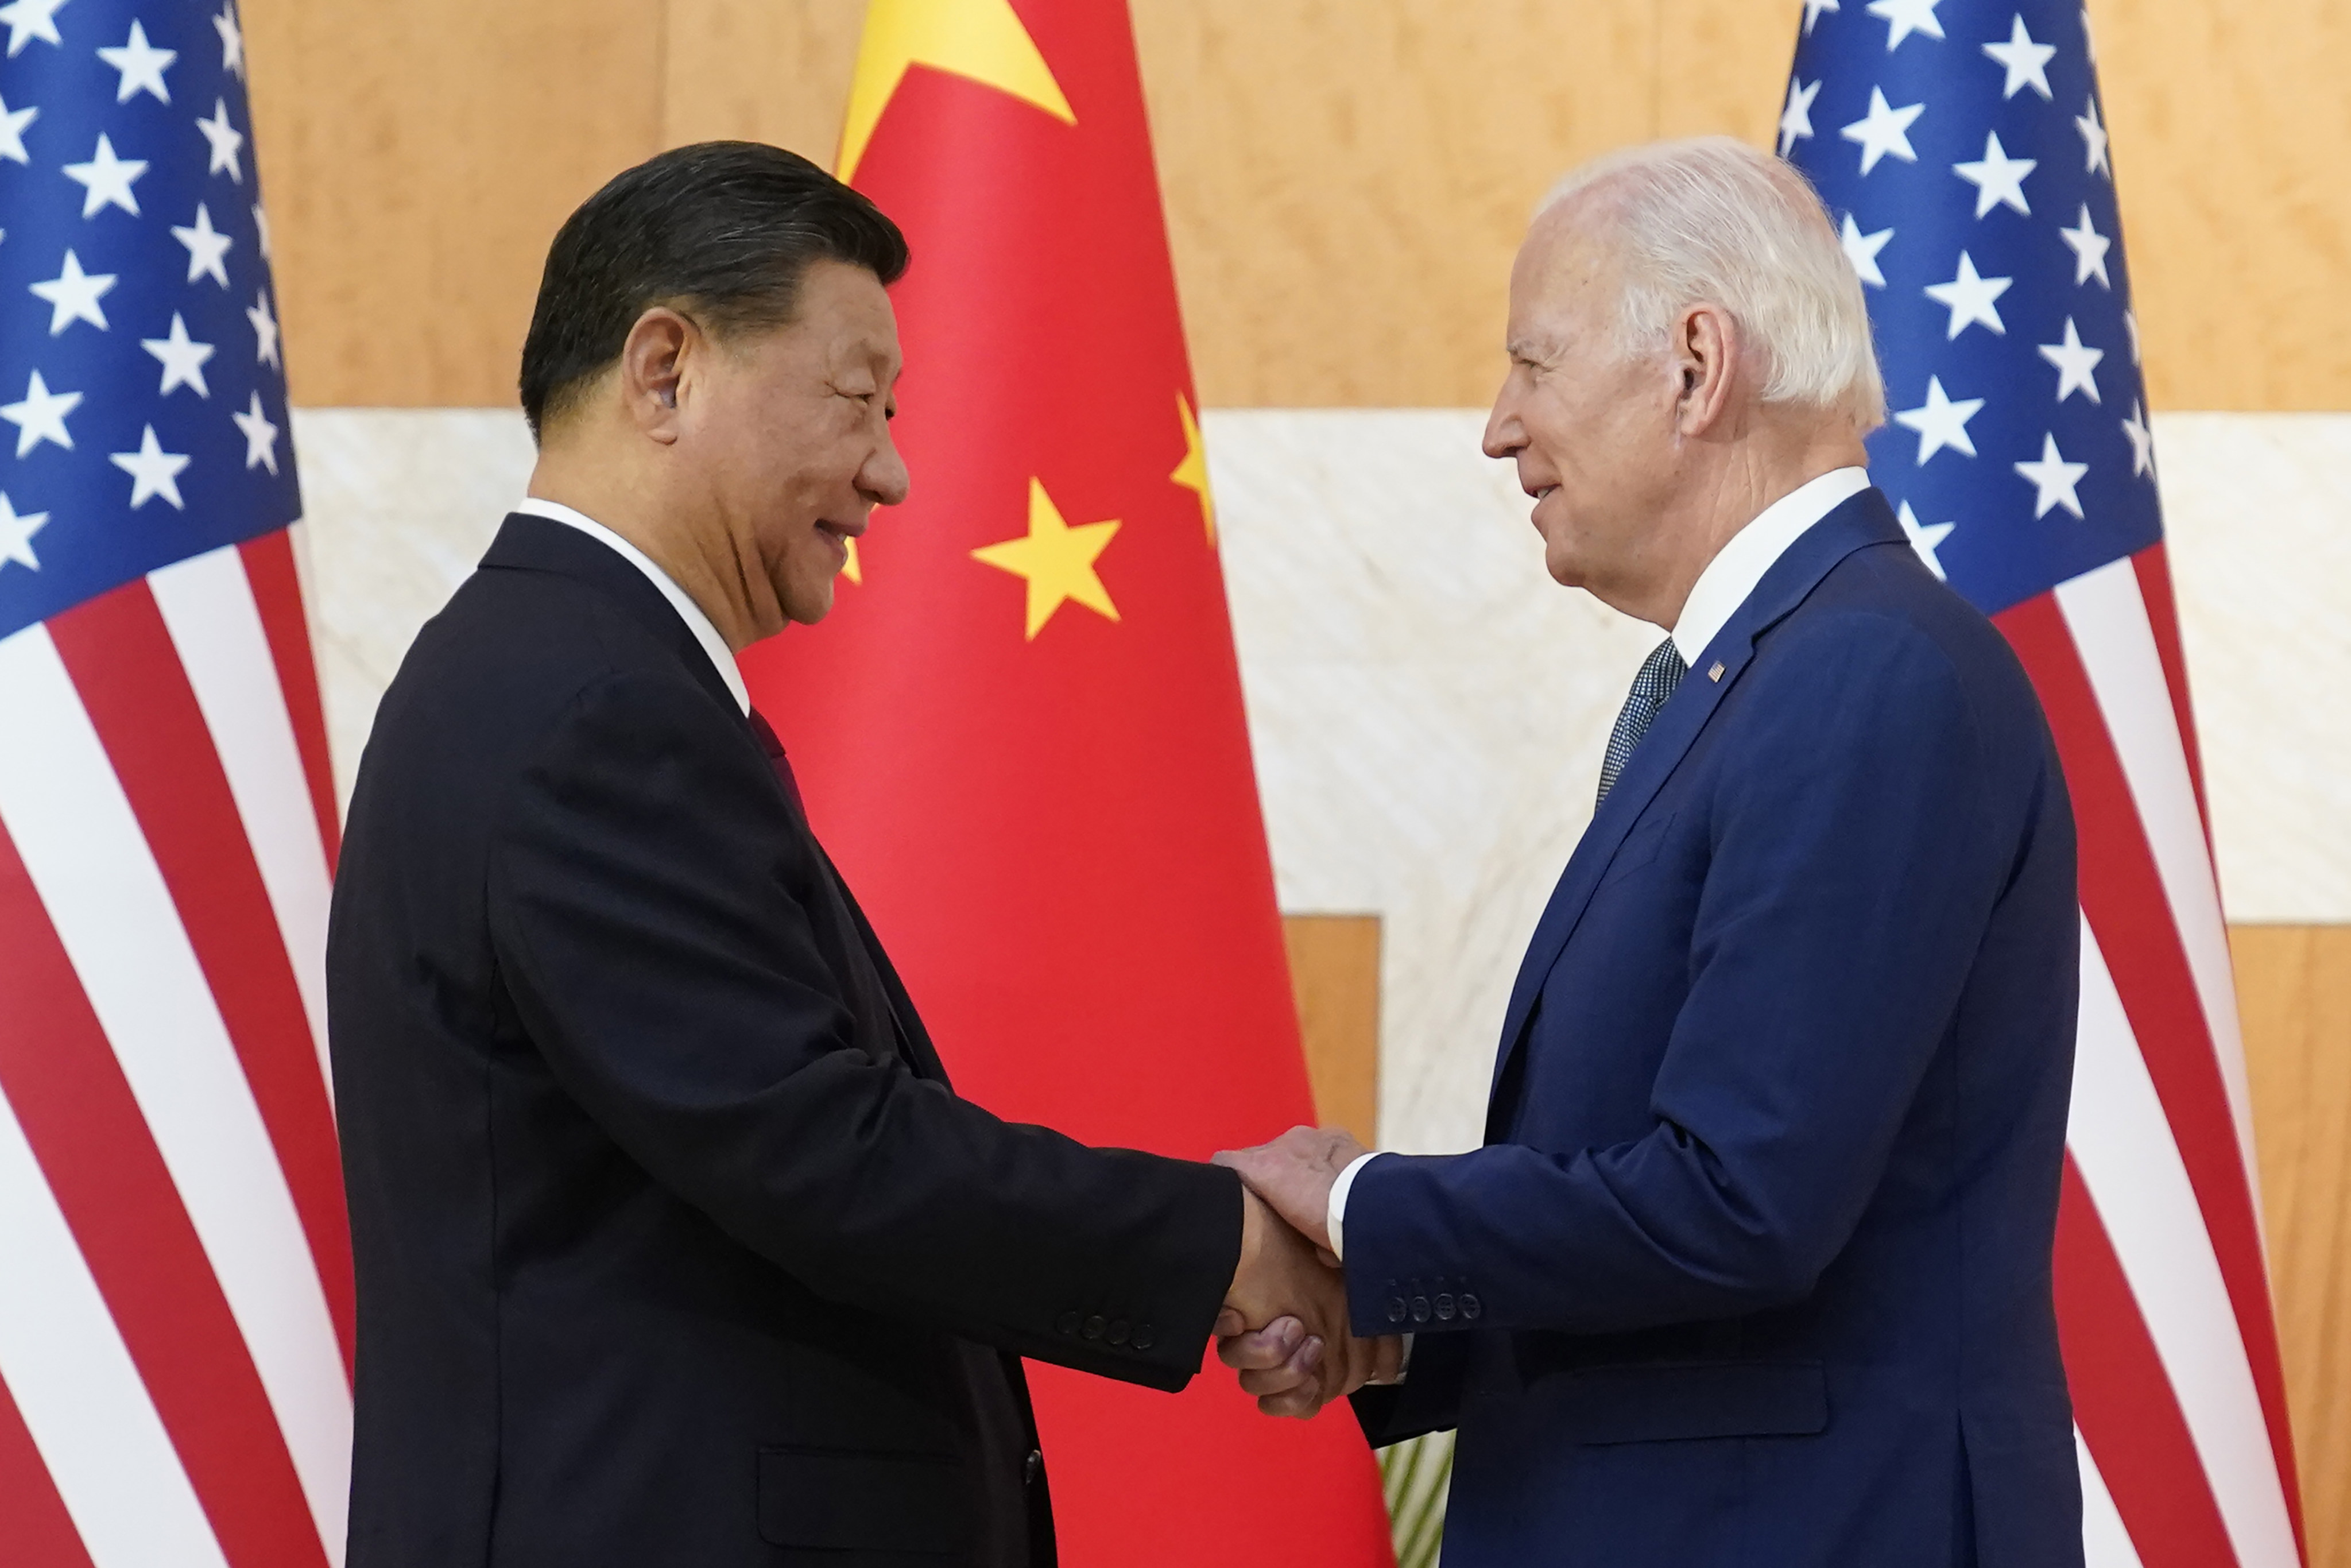 US President Joe Biden and Chinese counterpart Xi Jinping before their meeting on the sidelines of the Group of 20 summit, in Bali last November. Photo: AP